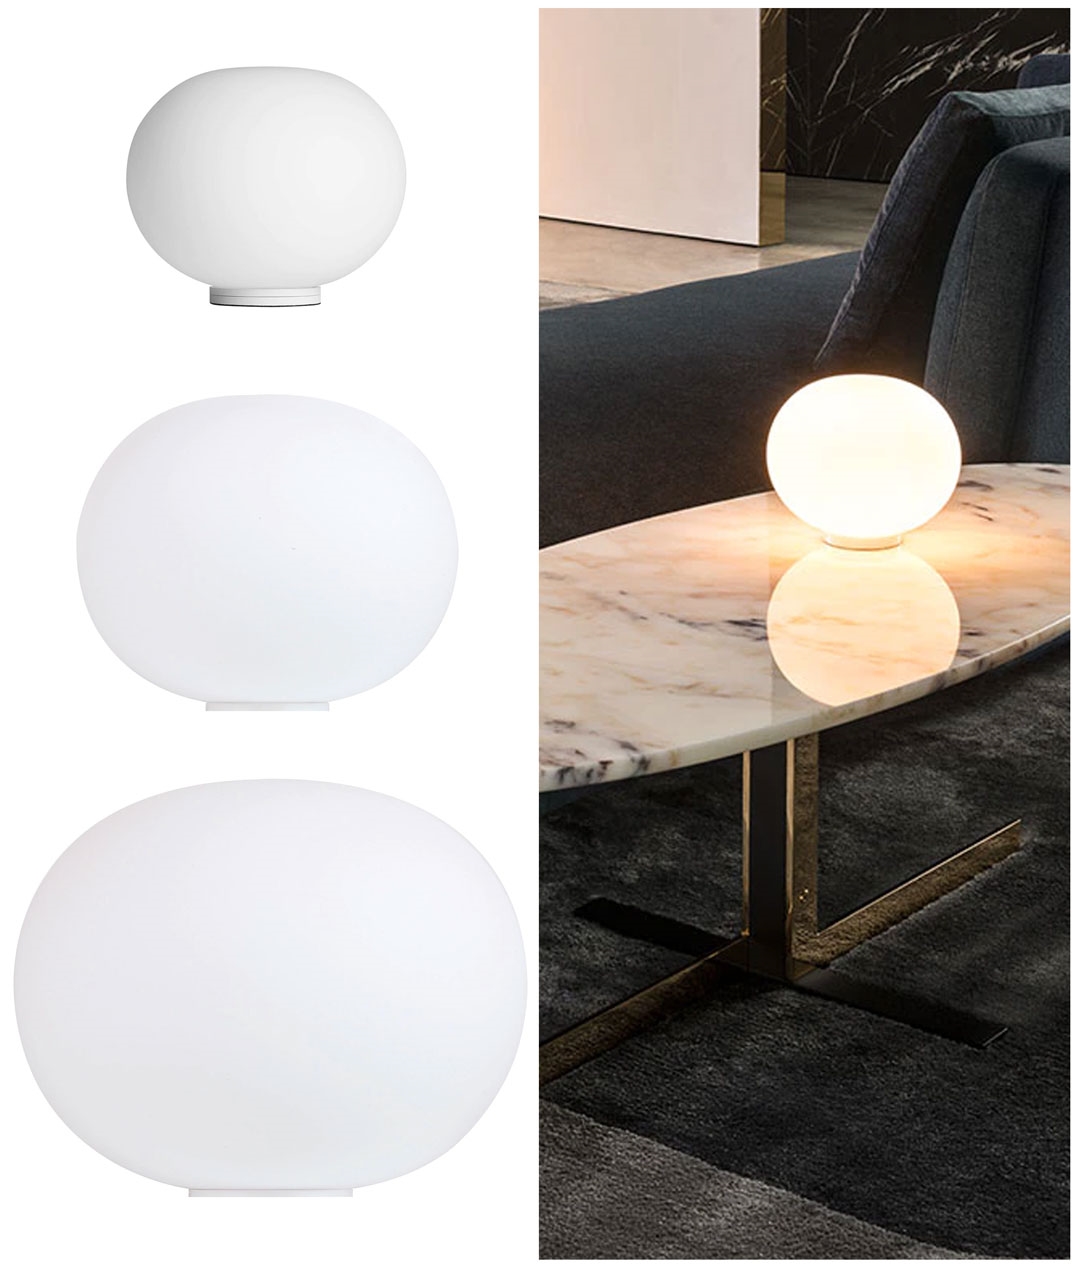 Dimmable Flos Glo Ball Designer Table Lamps, Glo Ball Mini Table Lamp